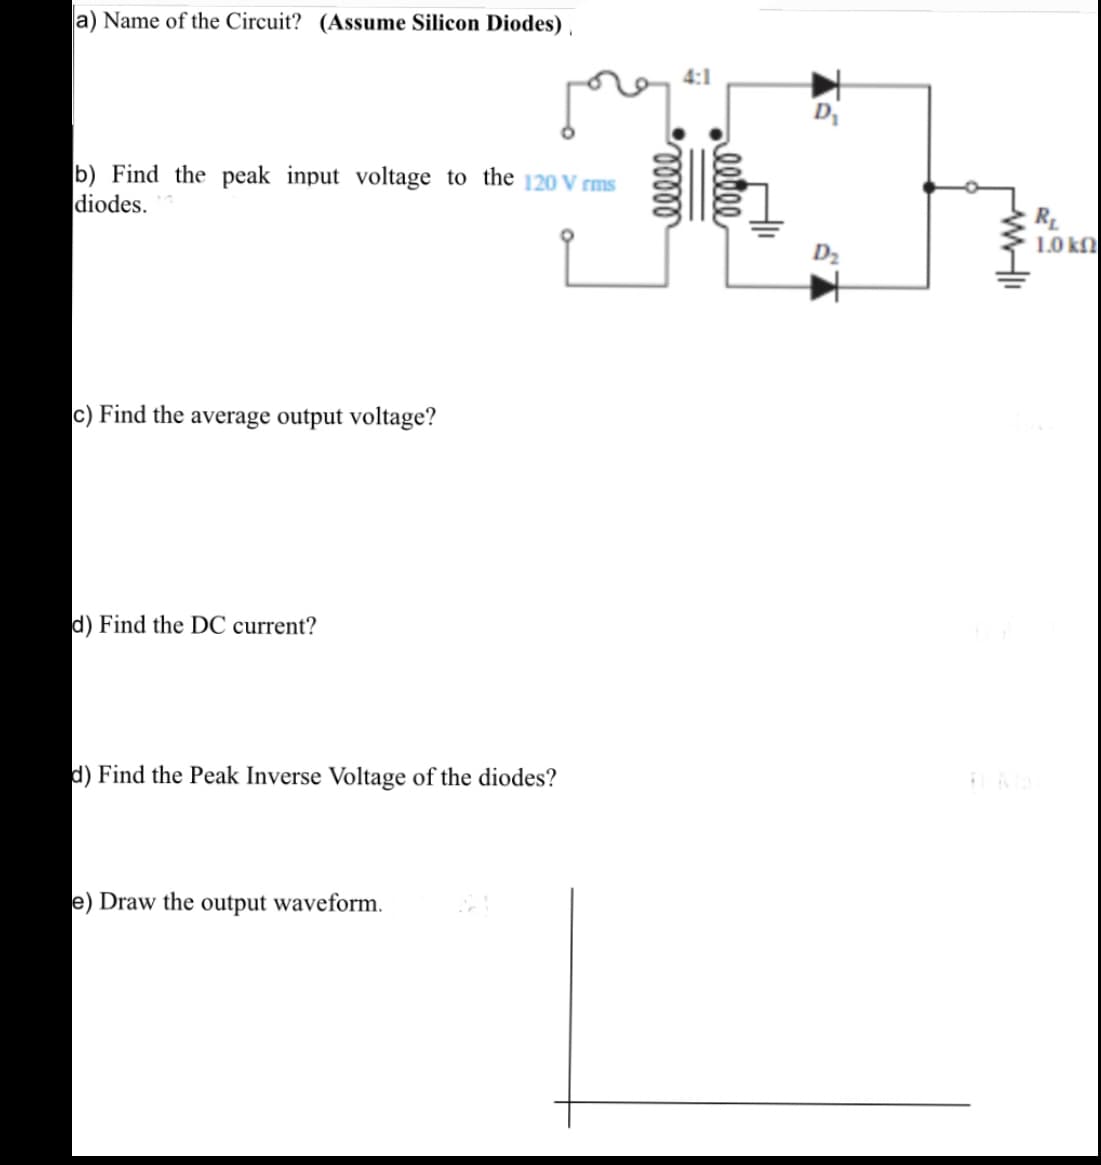 a) Name of the Circuit? (Assume Silicon Diodes) ,
4:1
D
b) Find the peak input voltage to the 120 V rms
diodes.
R
1.0 k
D2
c) Find the average output voltage?
d) Find the DC current?
d) Find the Peak Inverse Voltage of the diodes?
e) Draw the output waveform.
eetee
